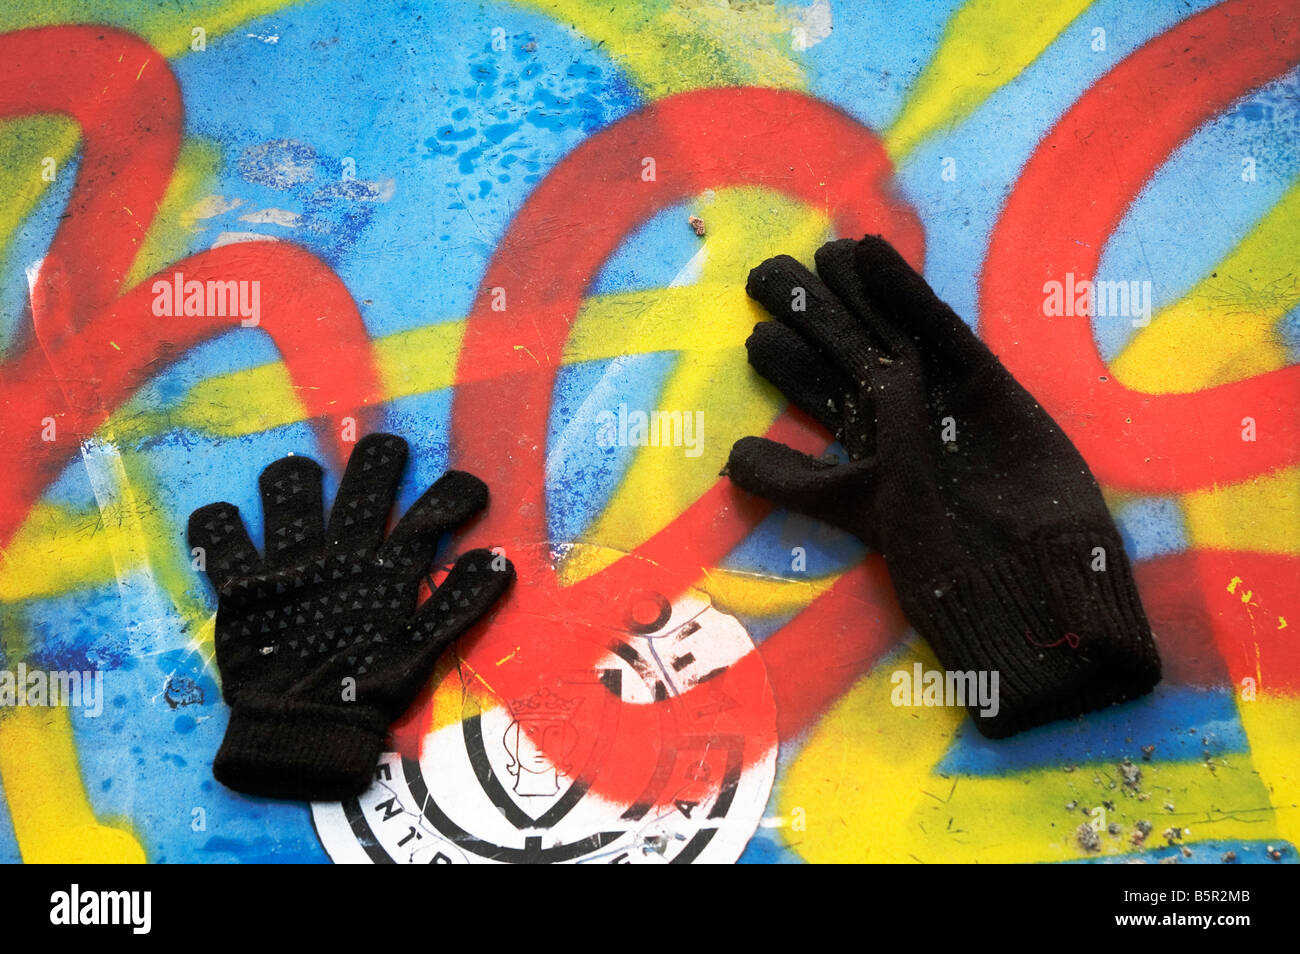 Lost mittens found and placed on a graffiti painted blue sandbox Stock Photo